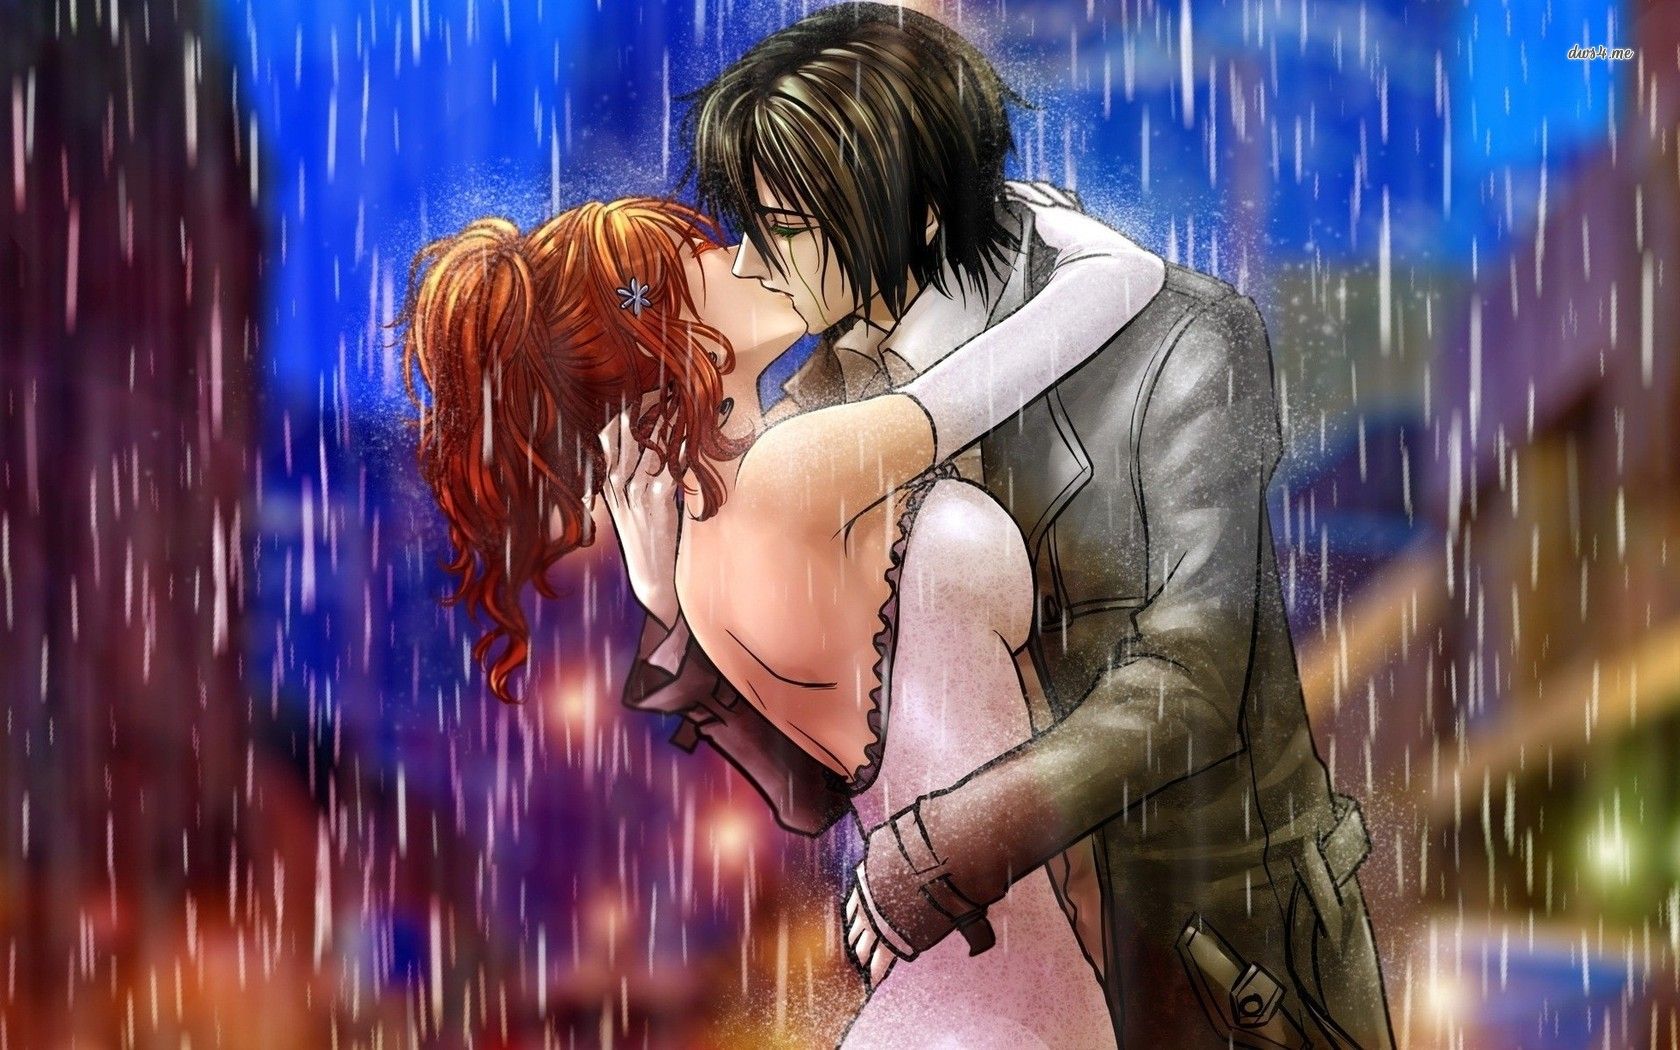 Couple Kissing In The Rain Wallpaper Couples Kissing